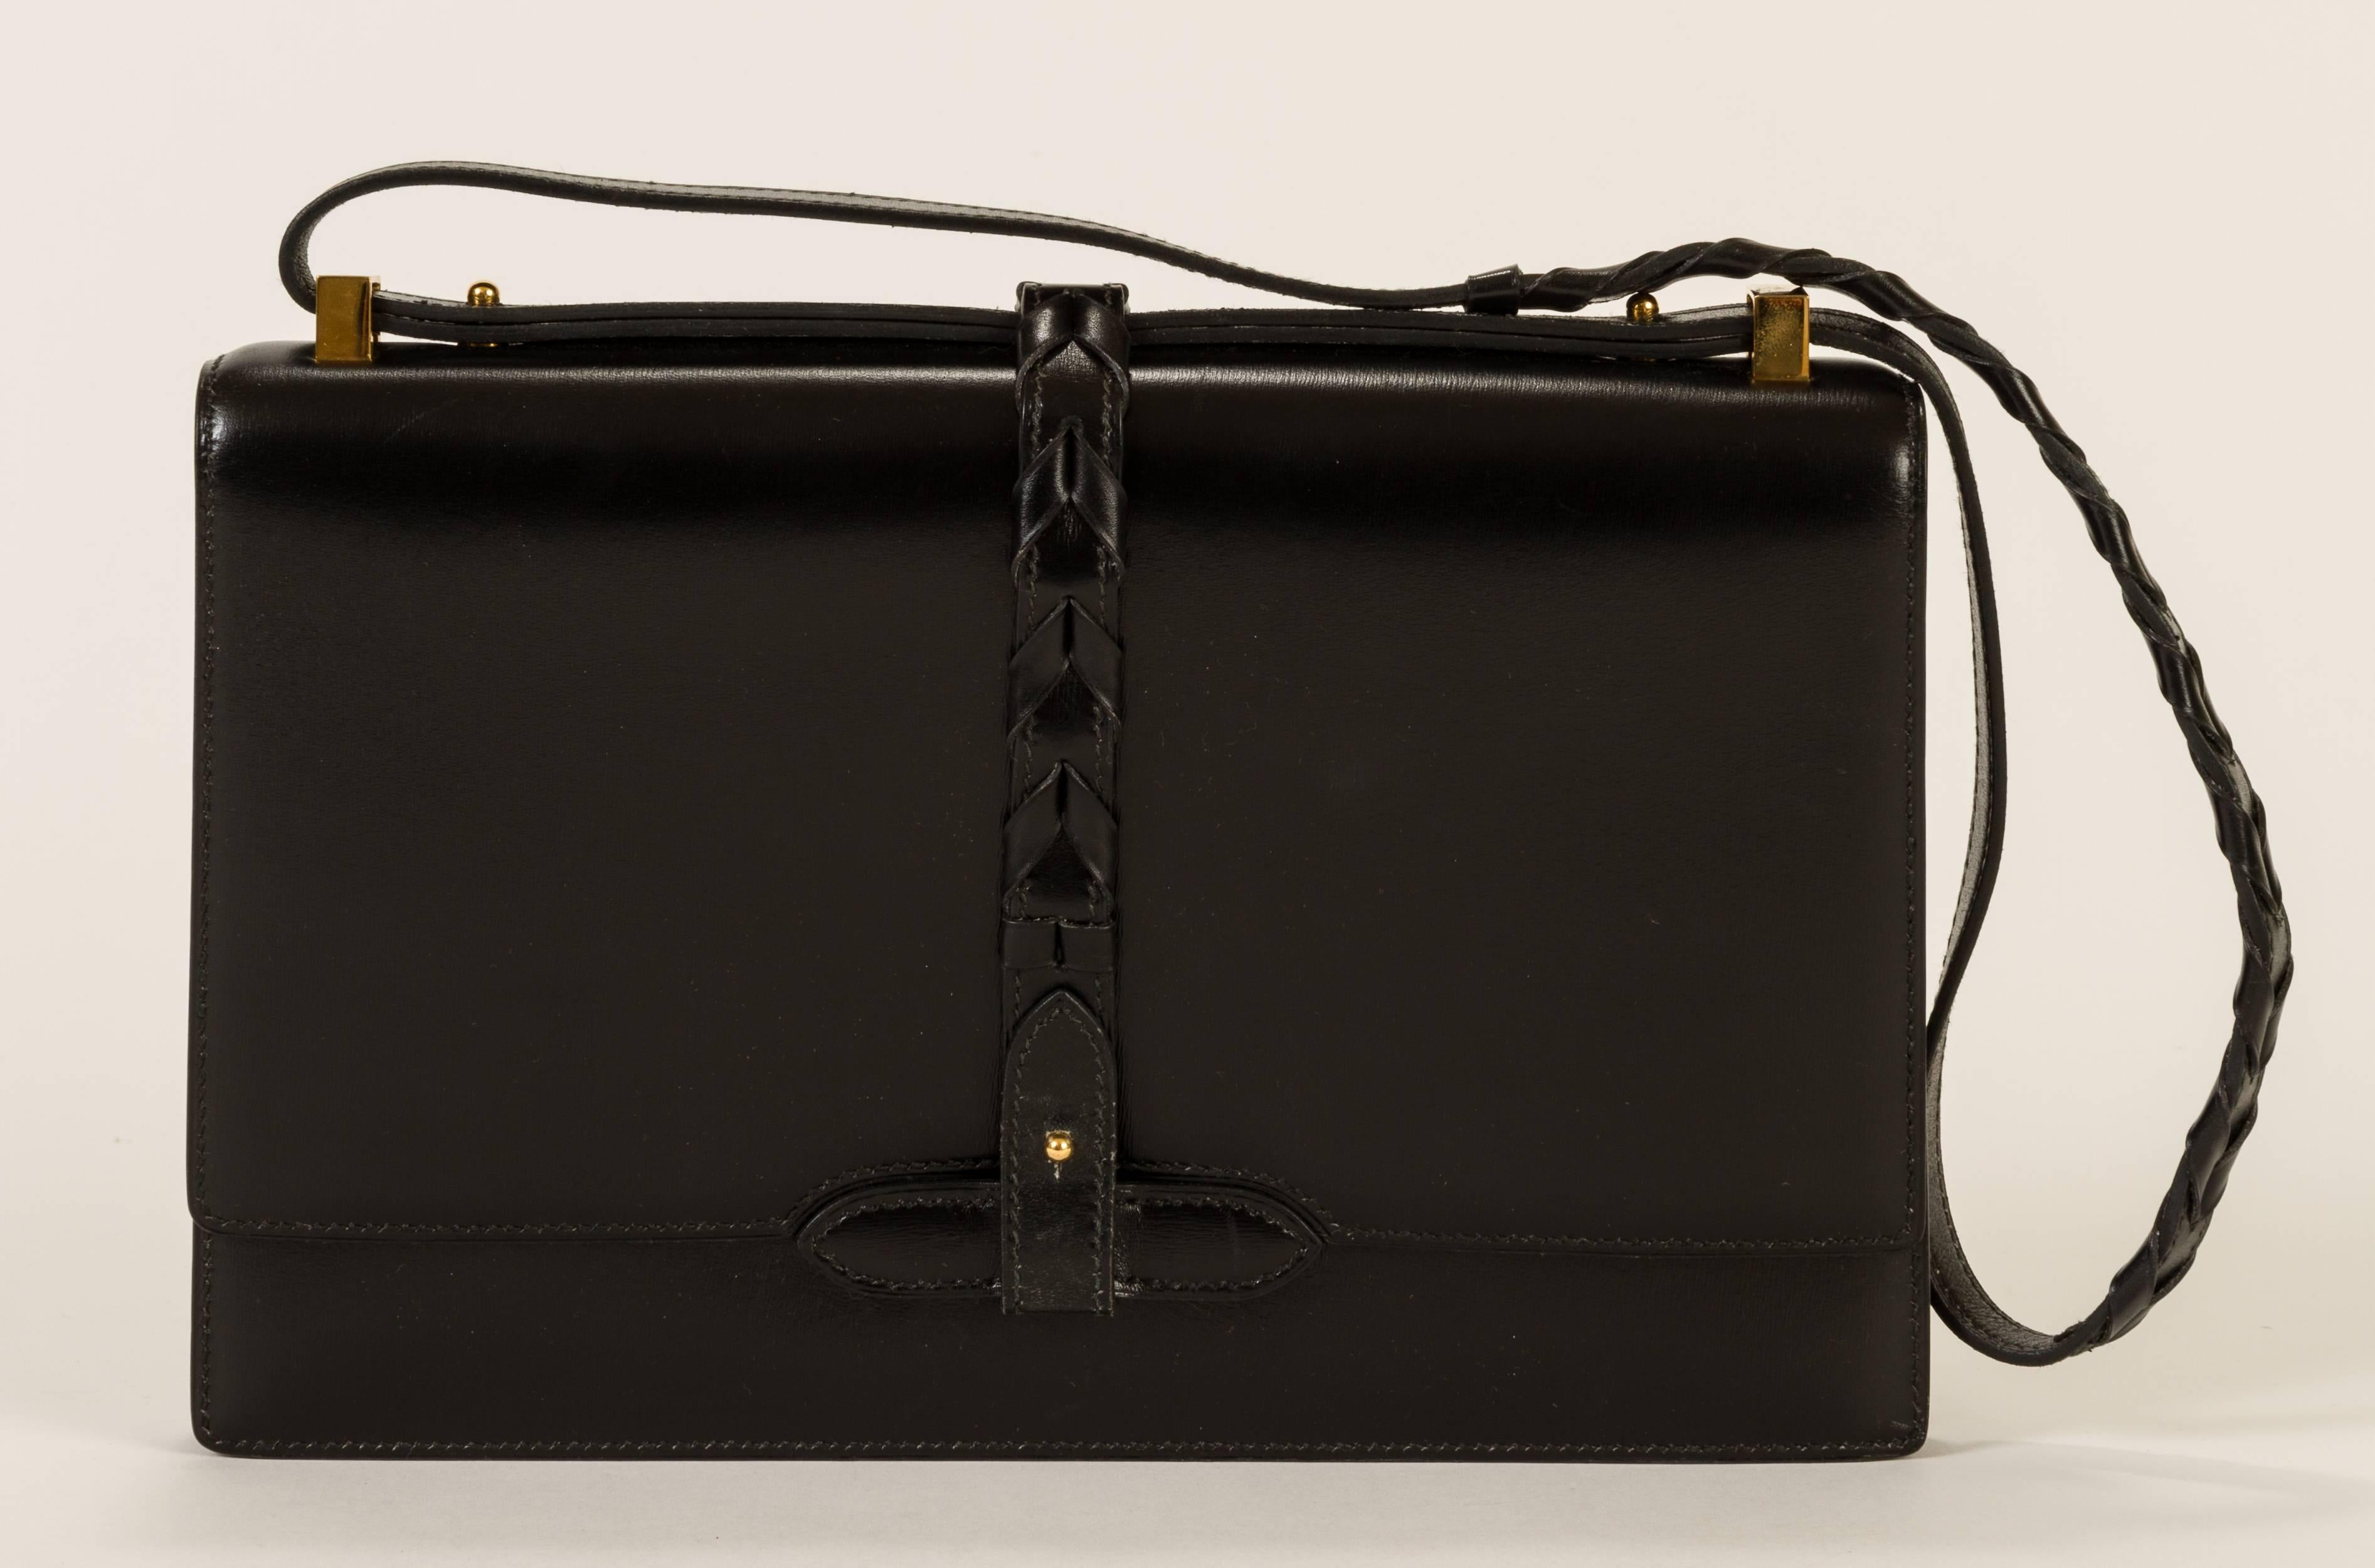 Vintage Hermès black leather shoulder bag with gold-plated hardware, leather interior and multiple interior pockets. Braided strap detaches to make the bag a clutch. Handle drop, 11